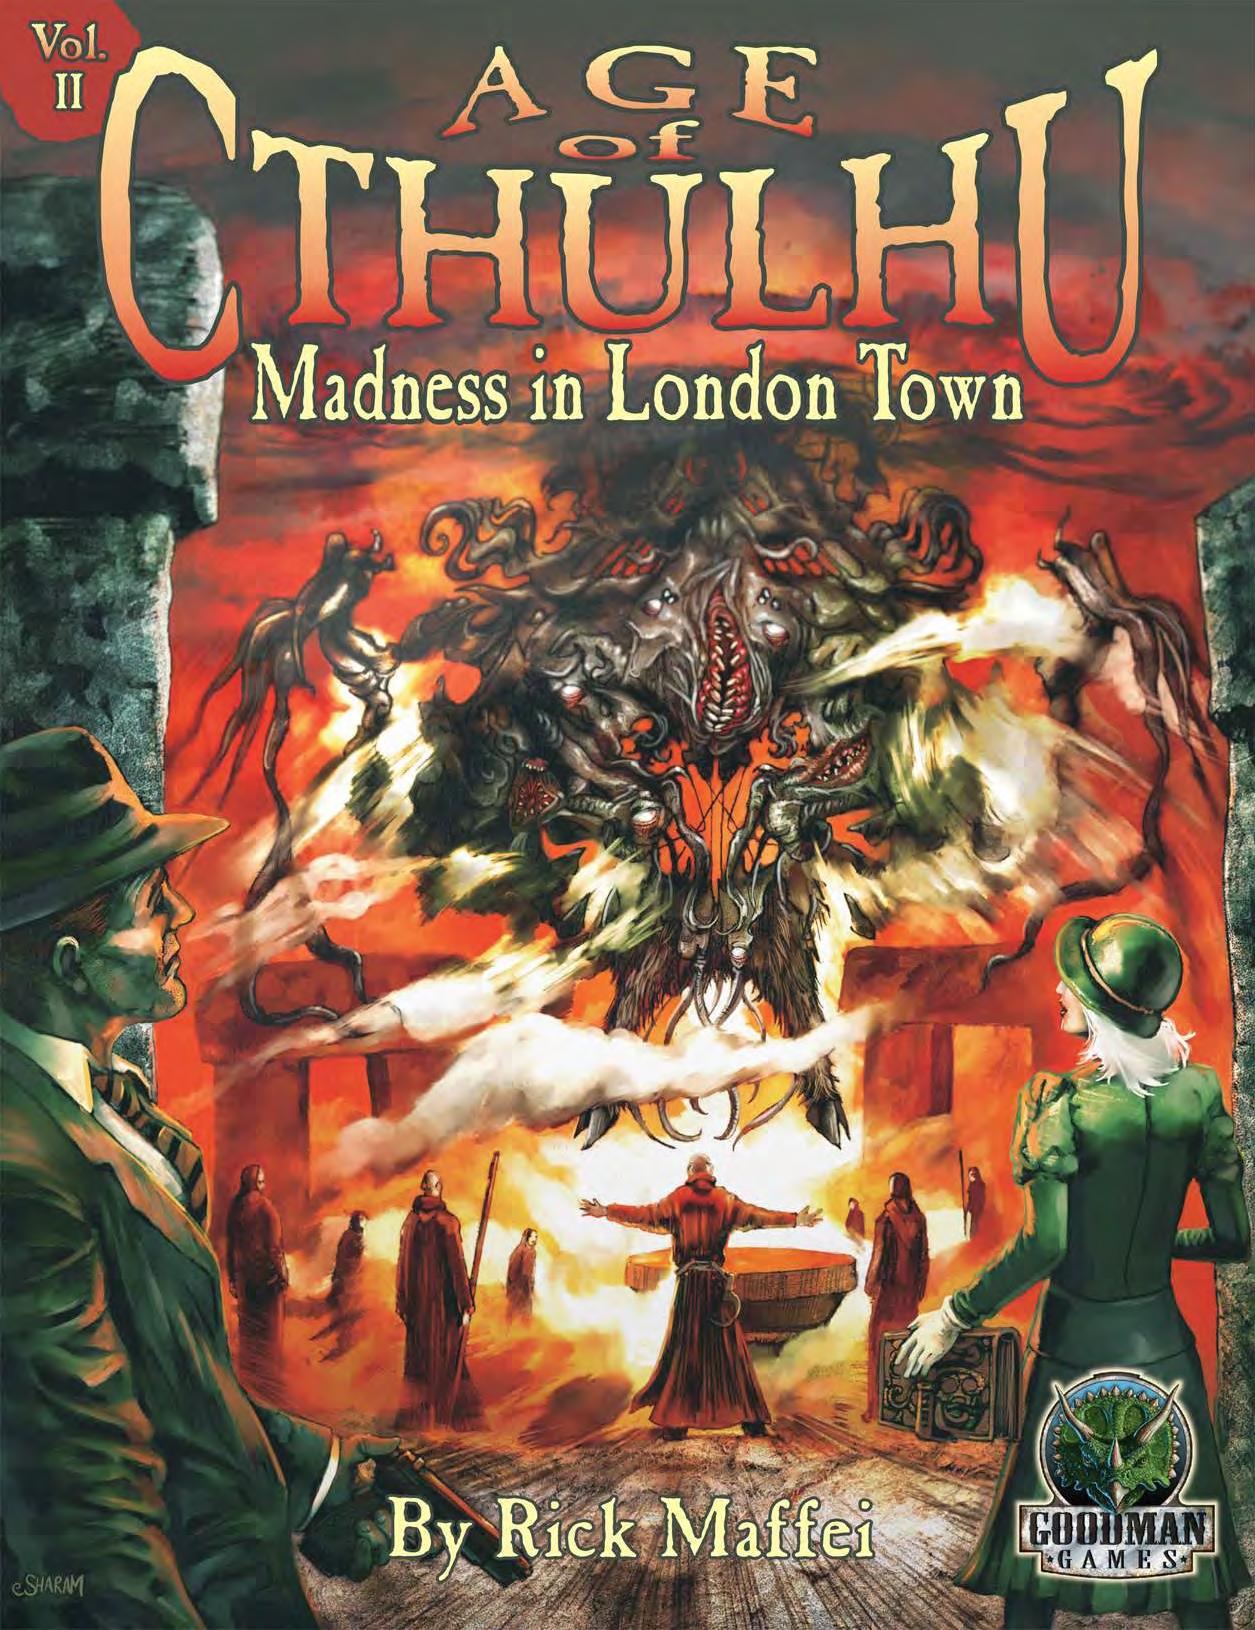 Age of Cthulhu, Vol. II: Madness in London Town